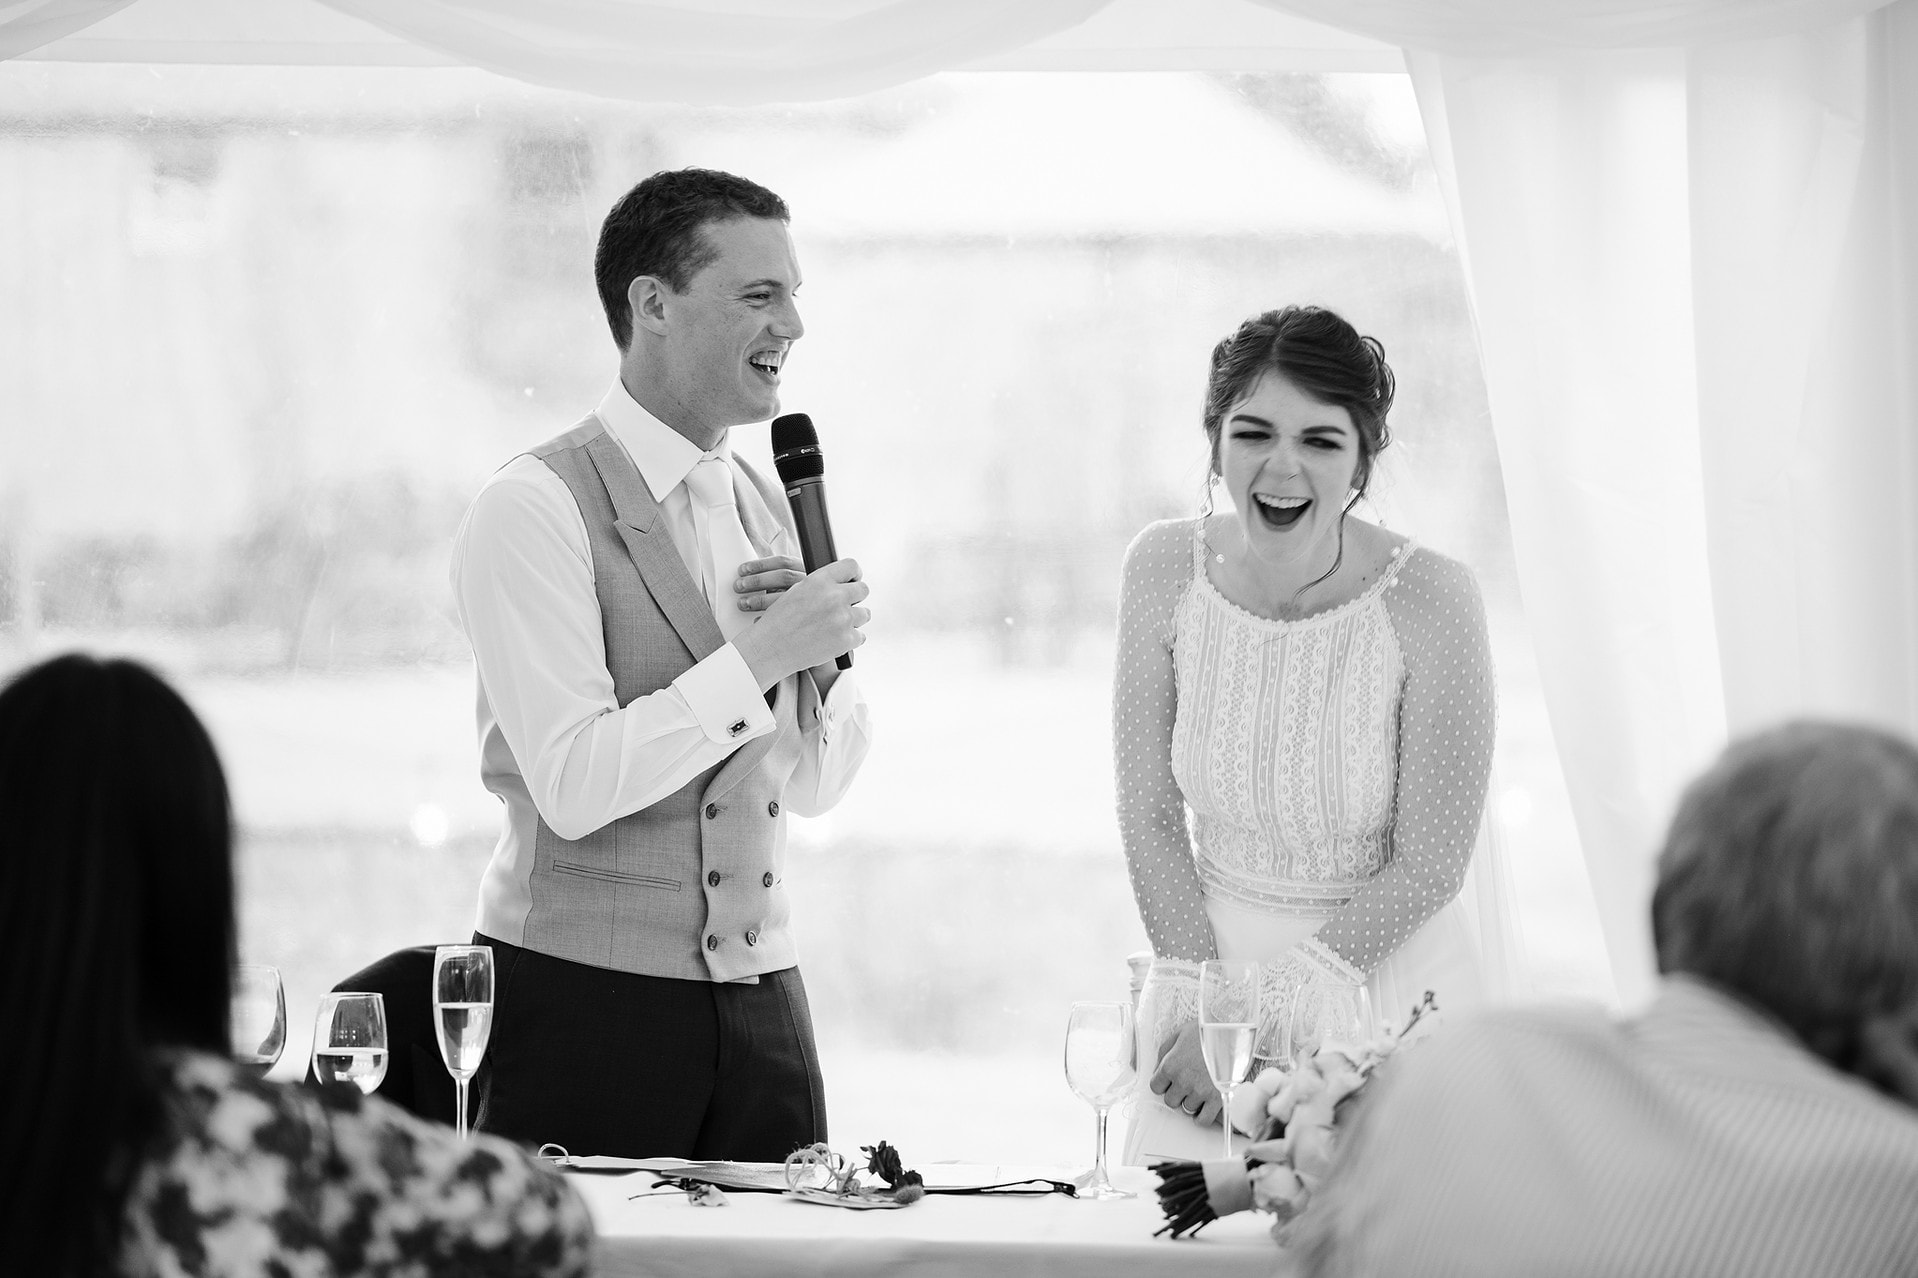 Bride laughing as the groom speaks about her during their joint speech